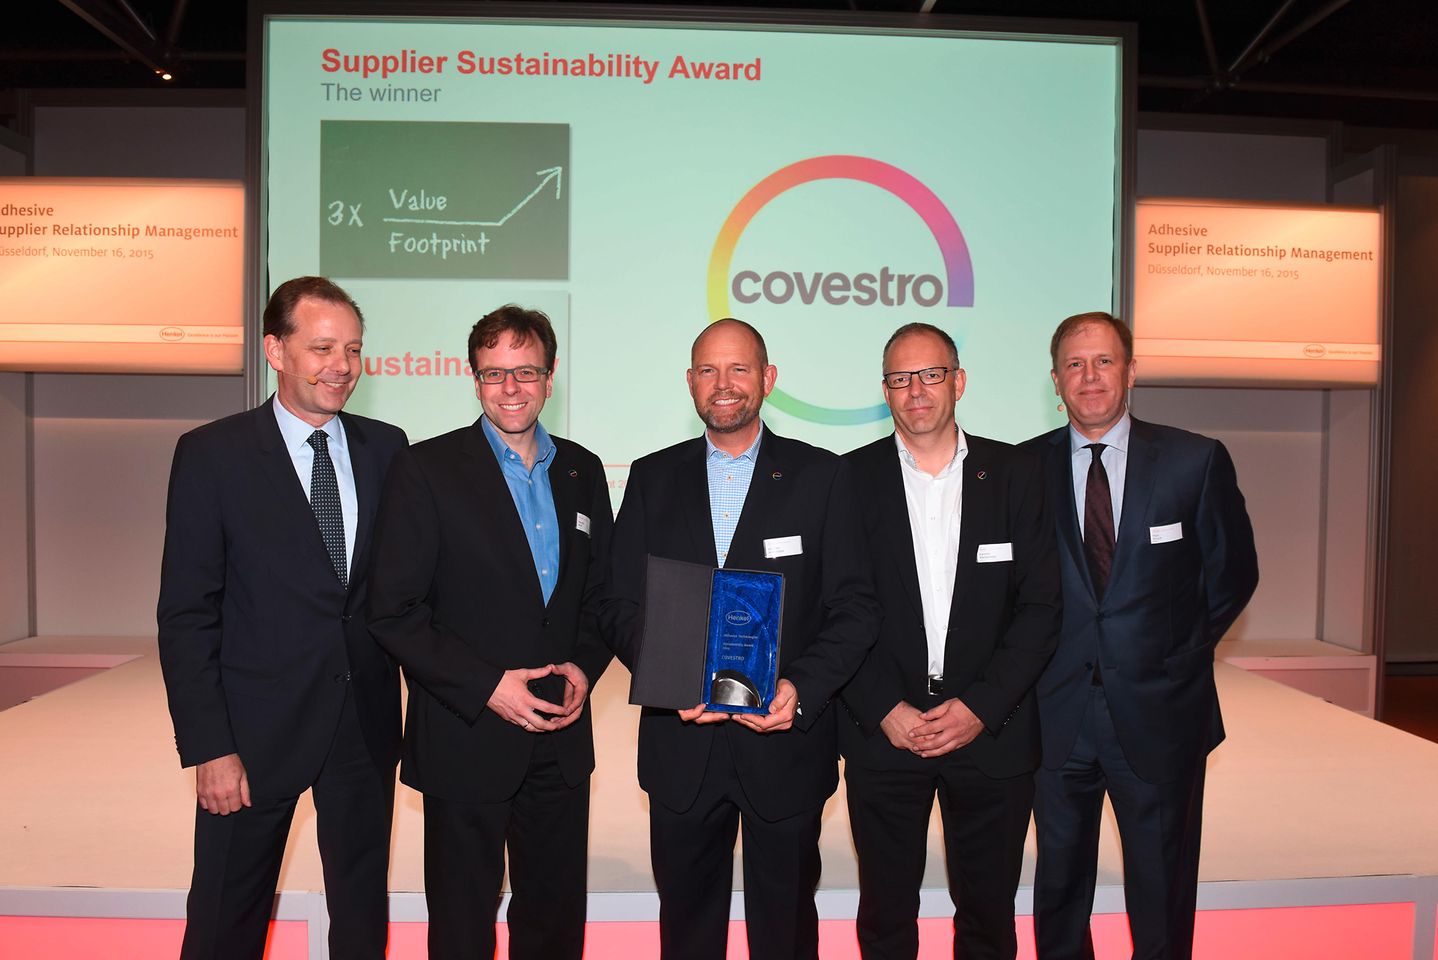 Supplier Sustainability Award for Covestro